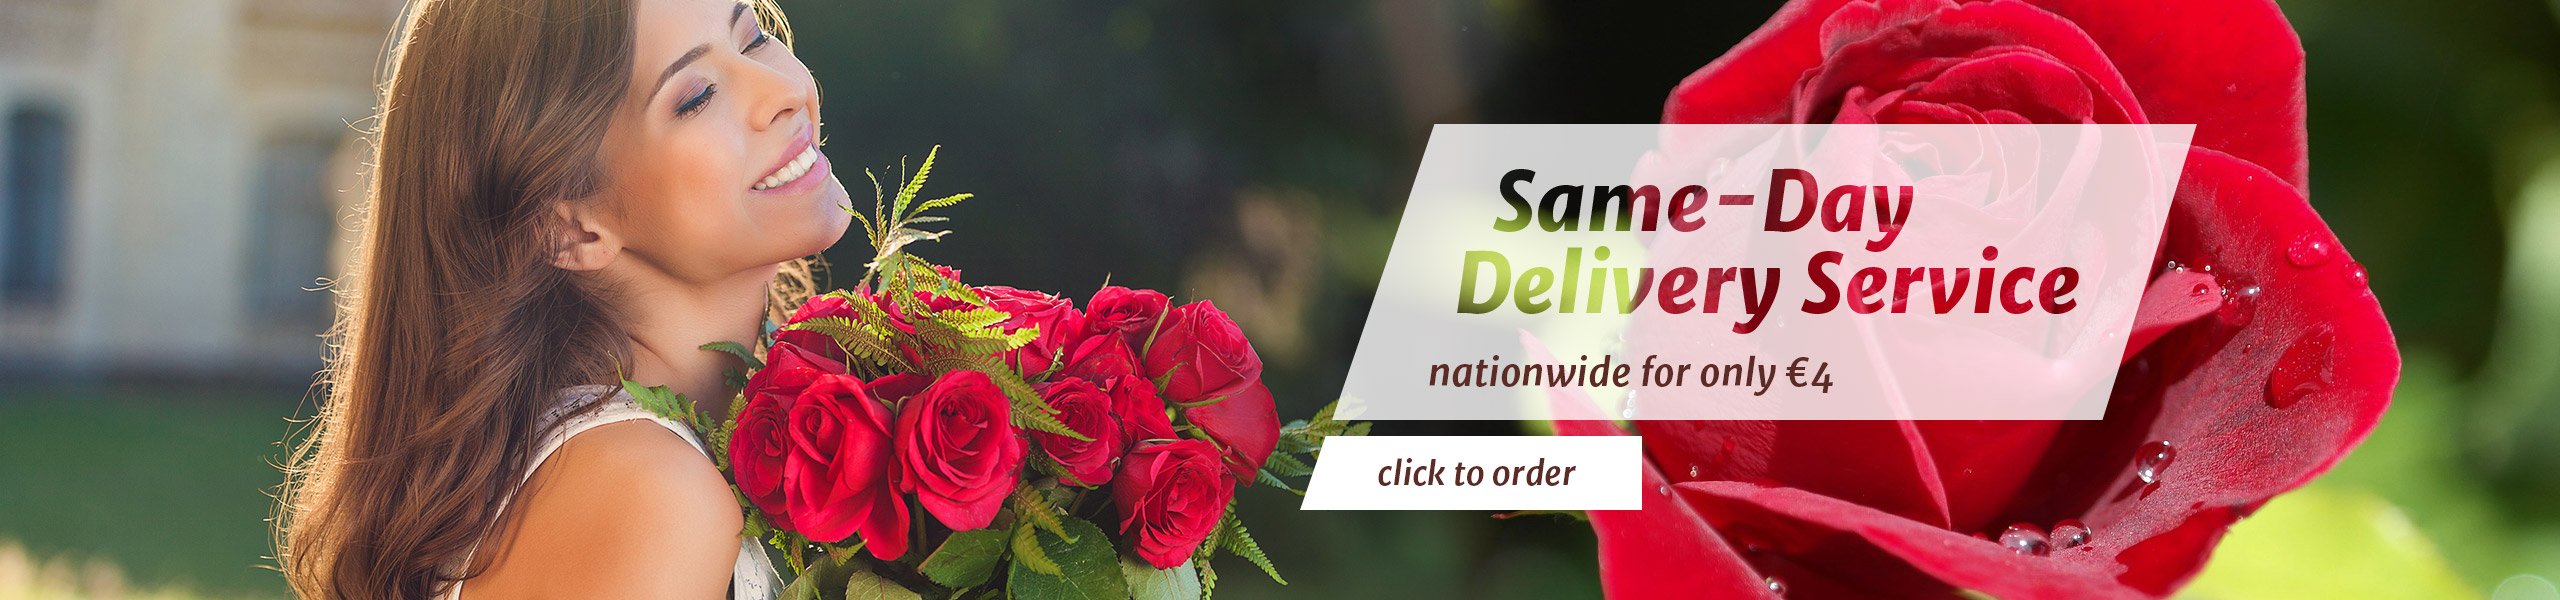 Same-Day Flower Delivery Service